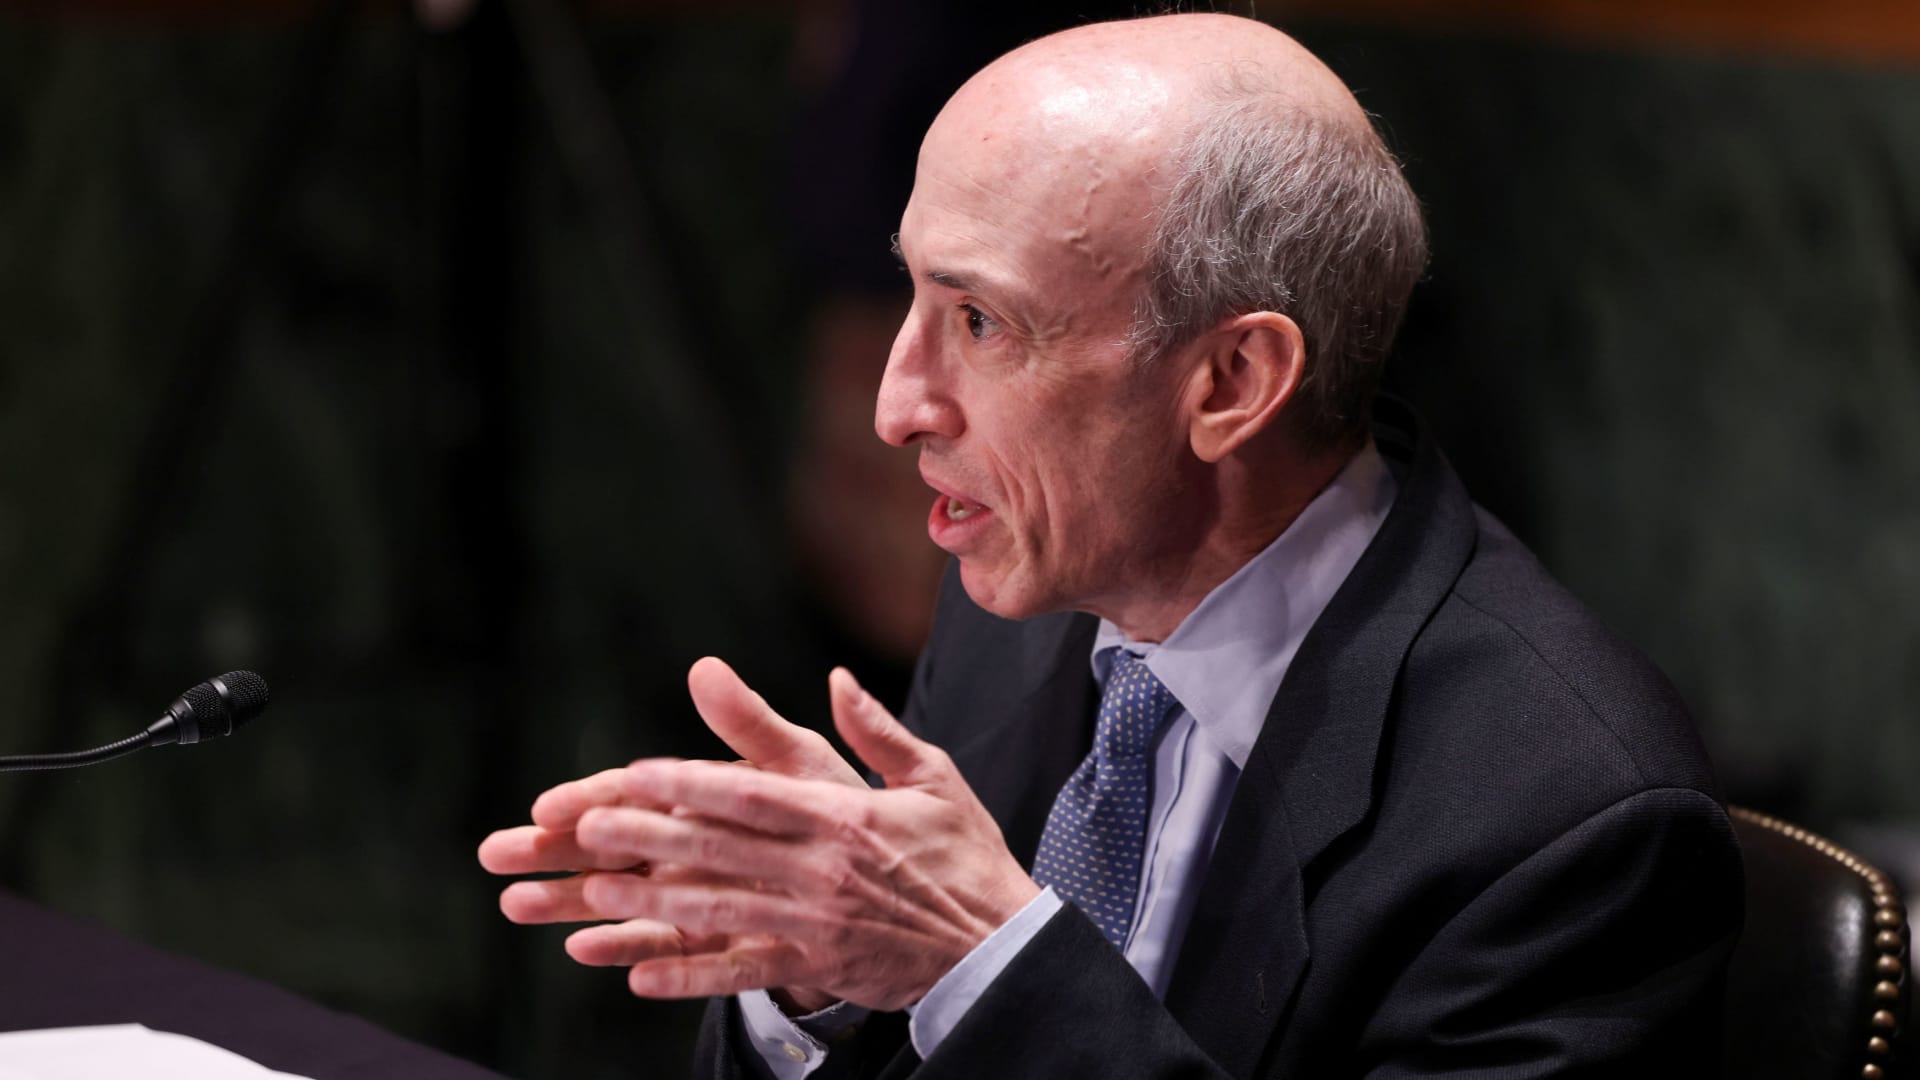 SEC Chair Gary Gensler cryptocurrency firms need to ‘come into compliance’